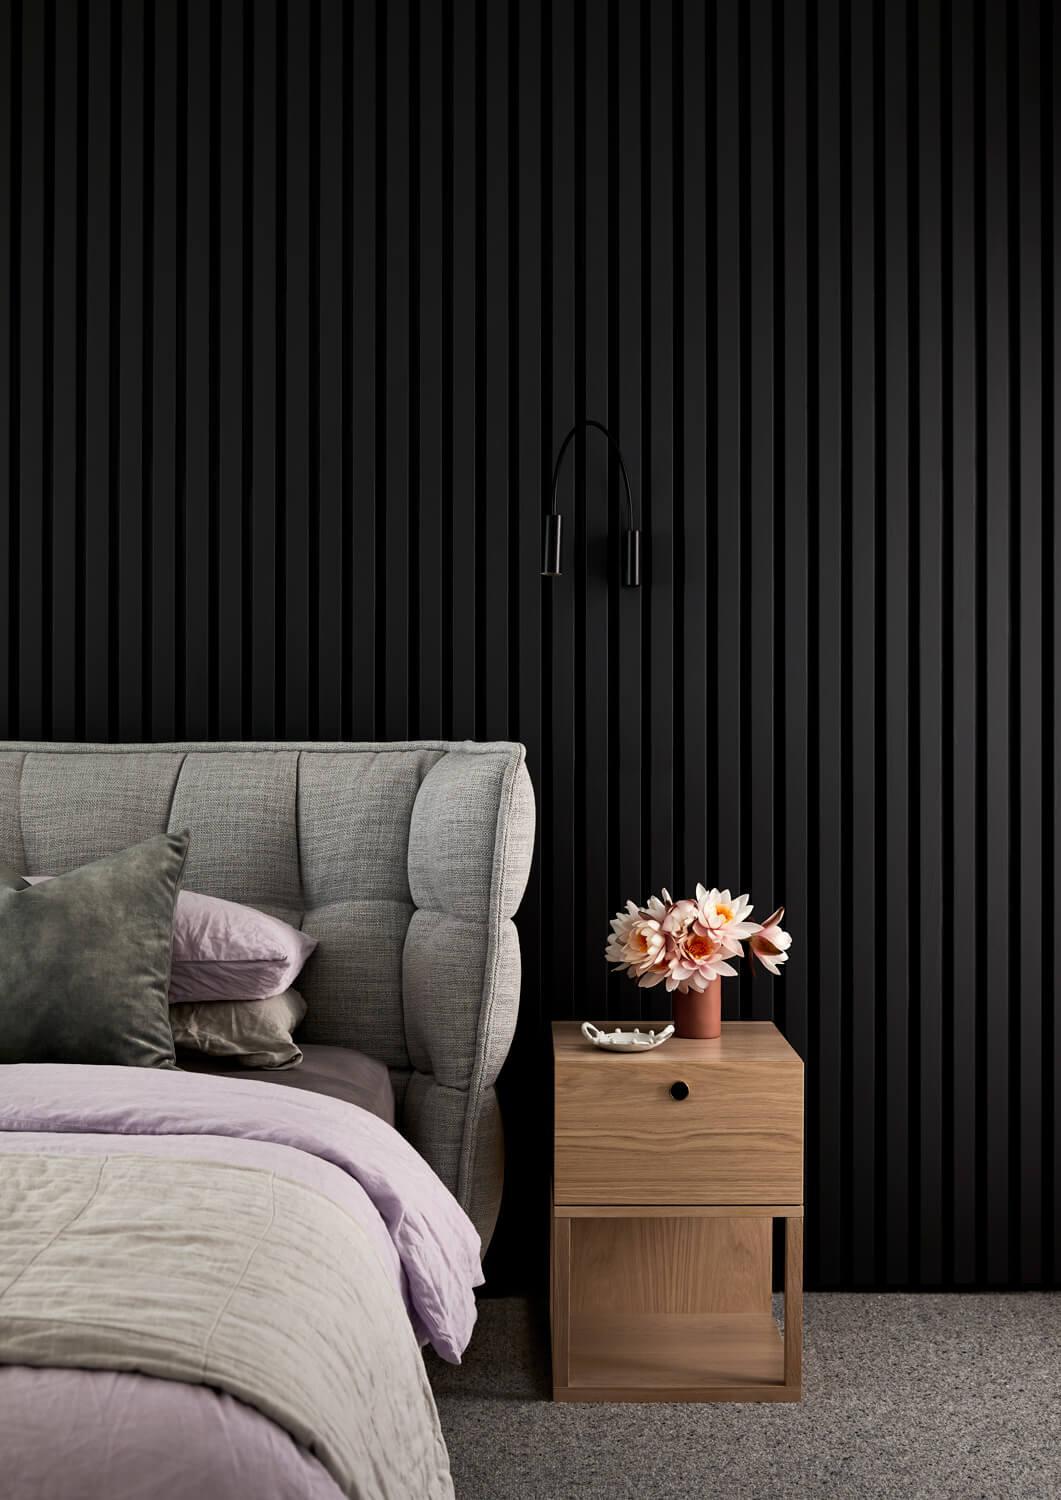 Warm Bedroom Furniture Contrasts Against Black Wall Cladding